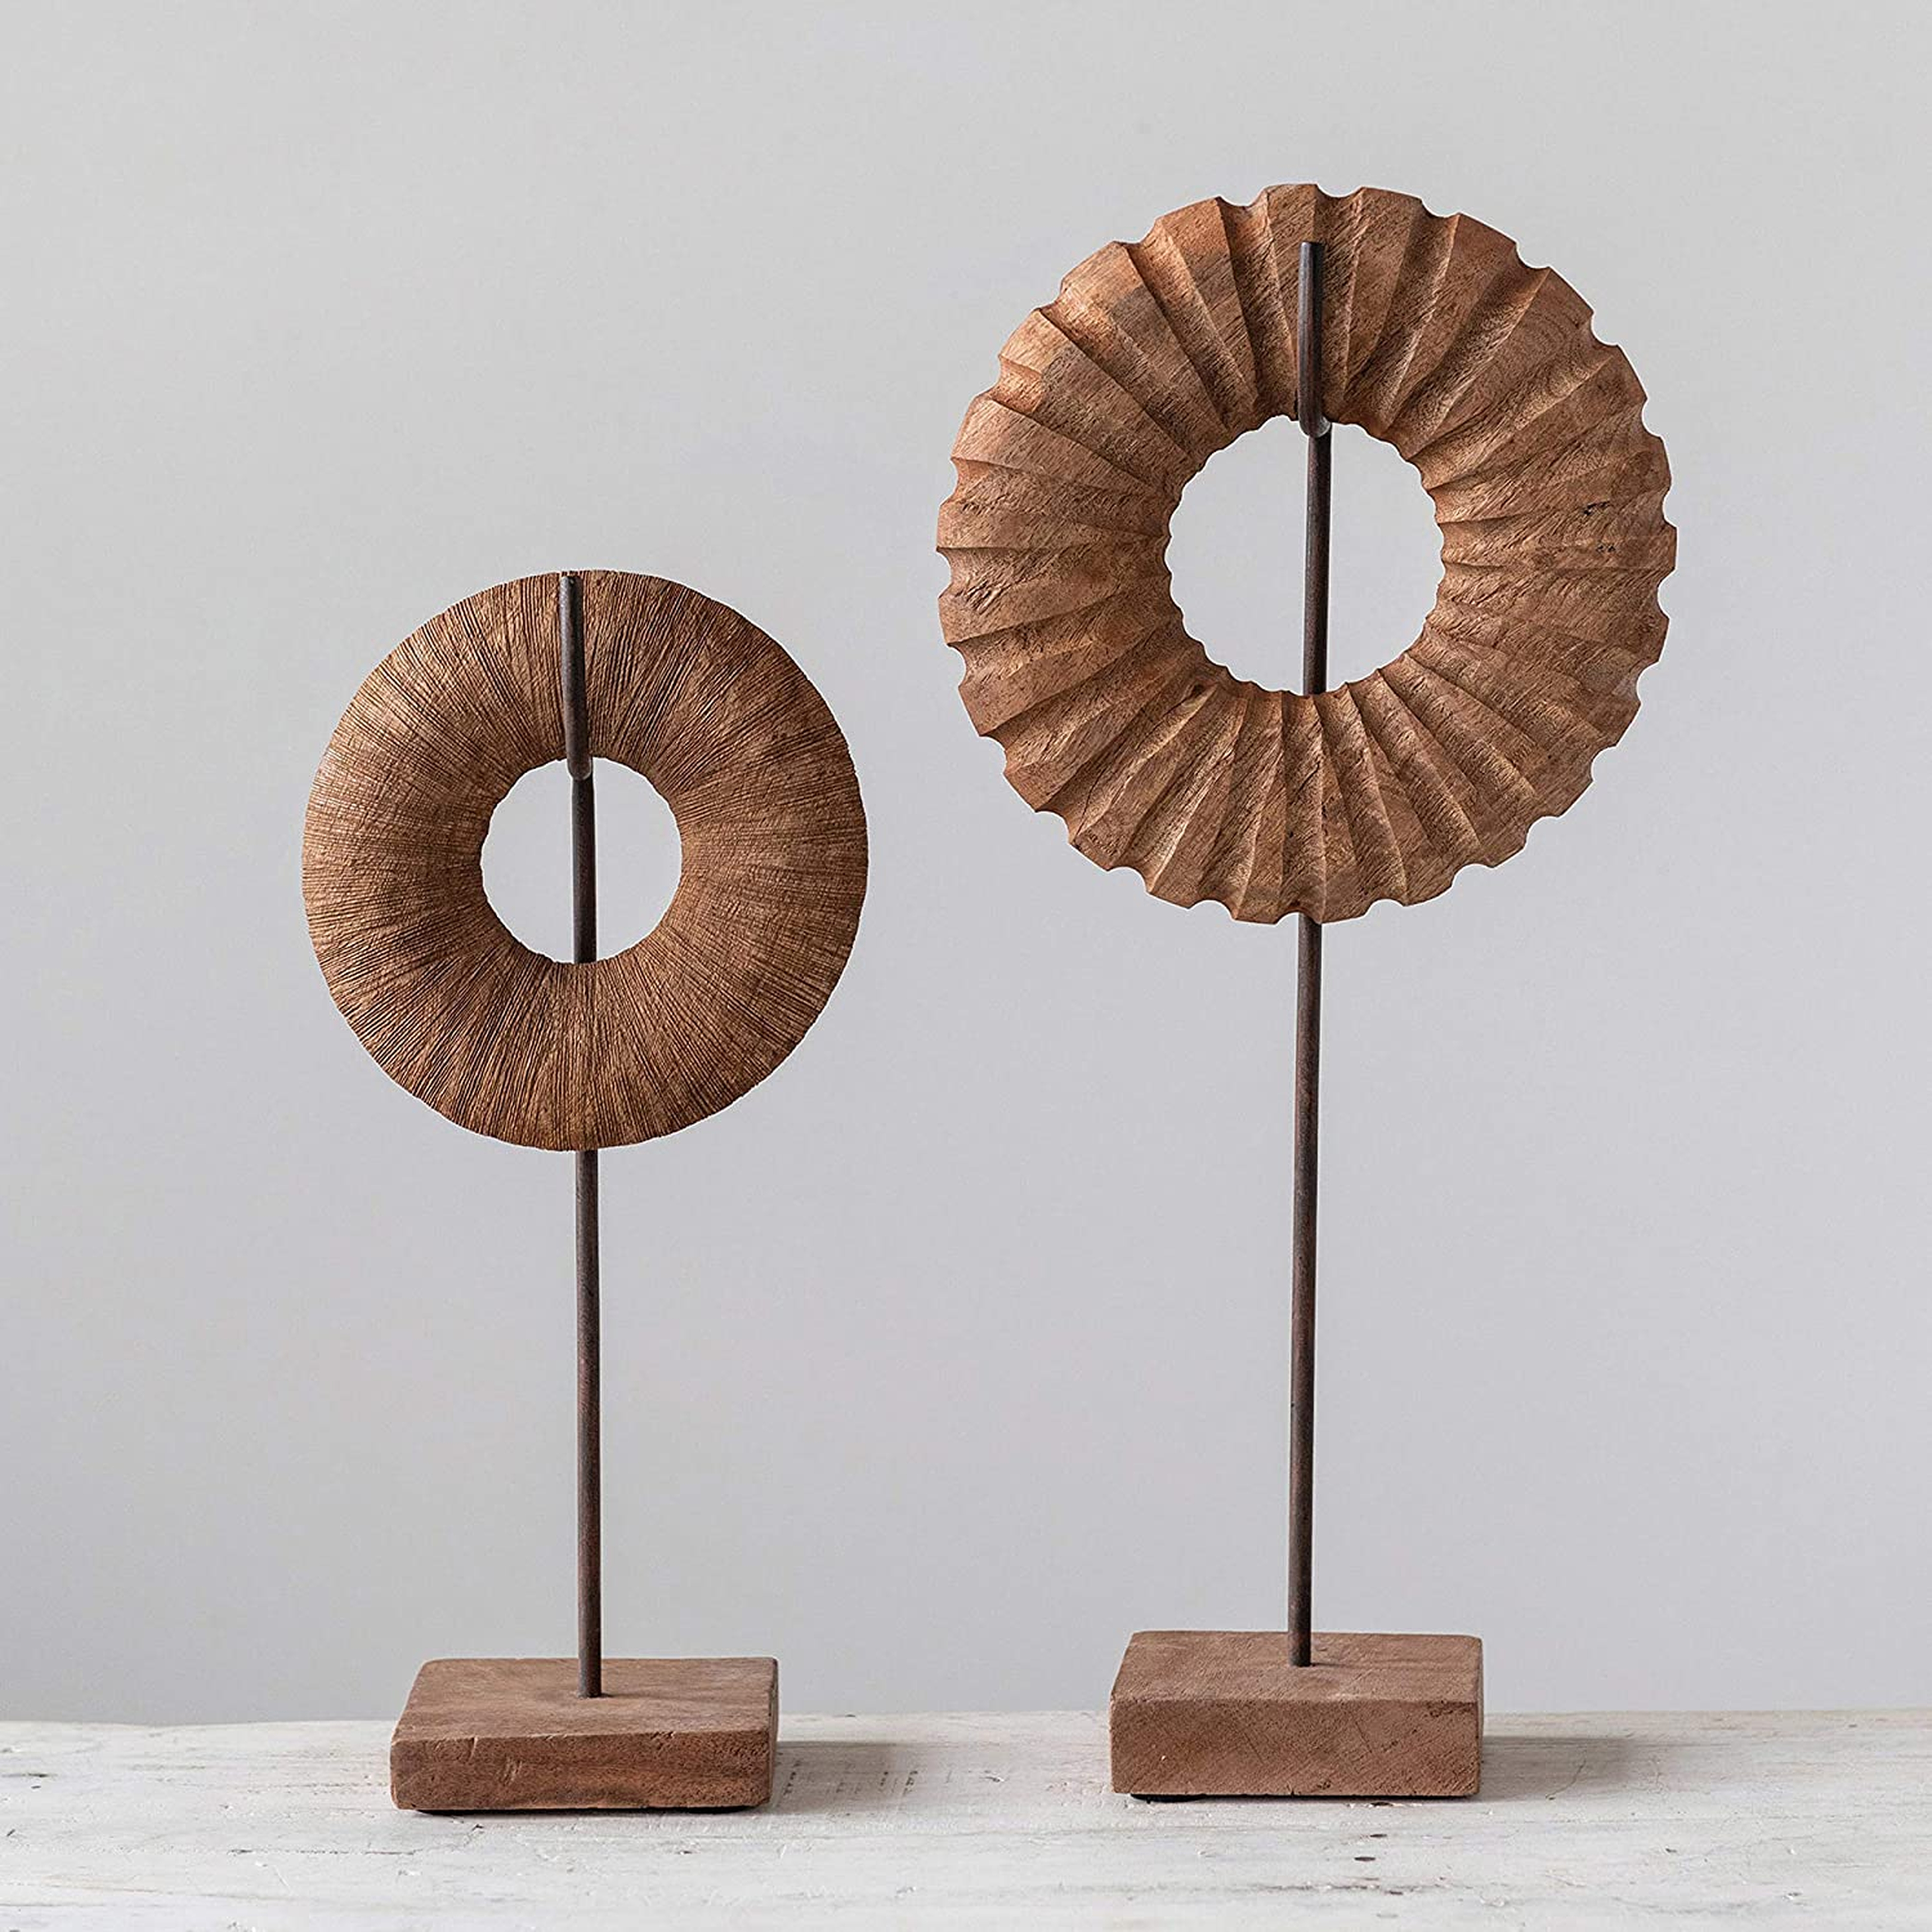 Hand-Carved Mango Wood Circle Object on Metal & Wood Stand, Set of 2 - Nomad Home